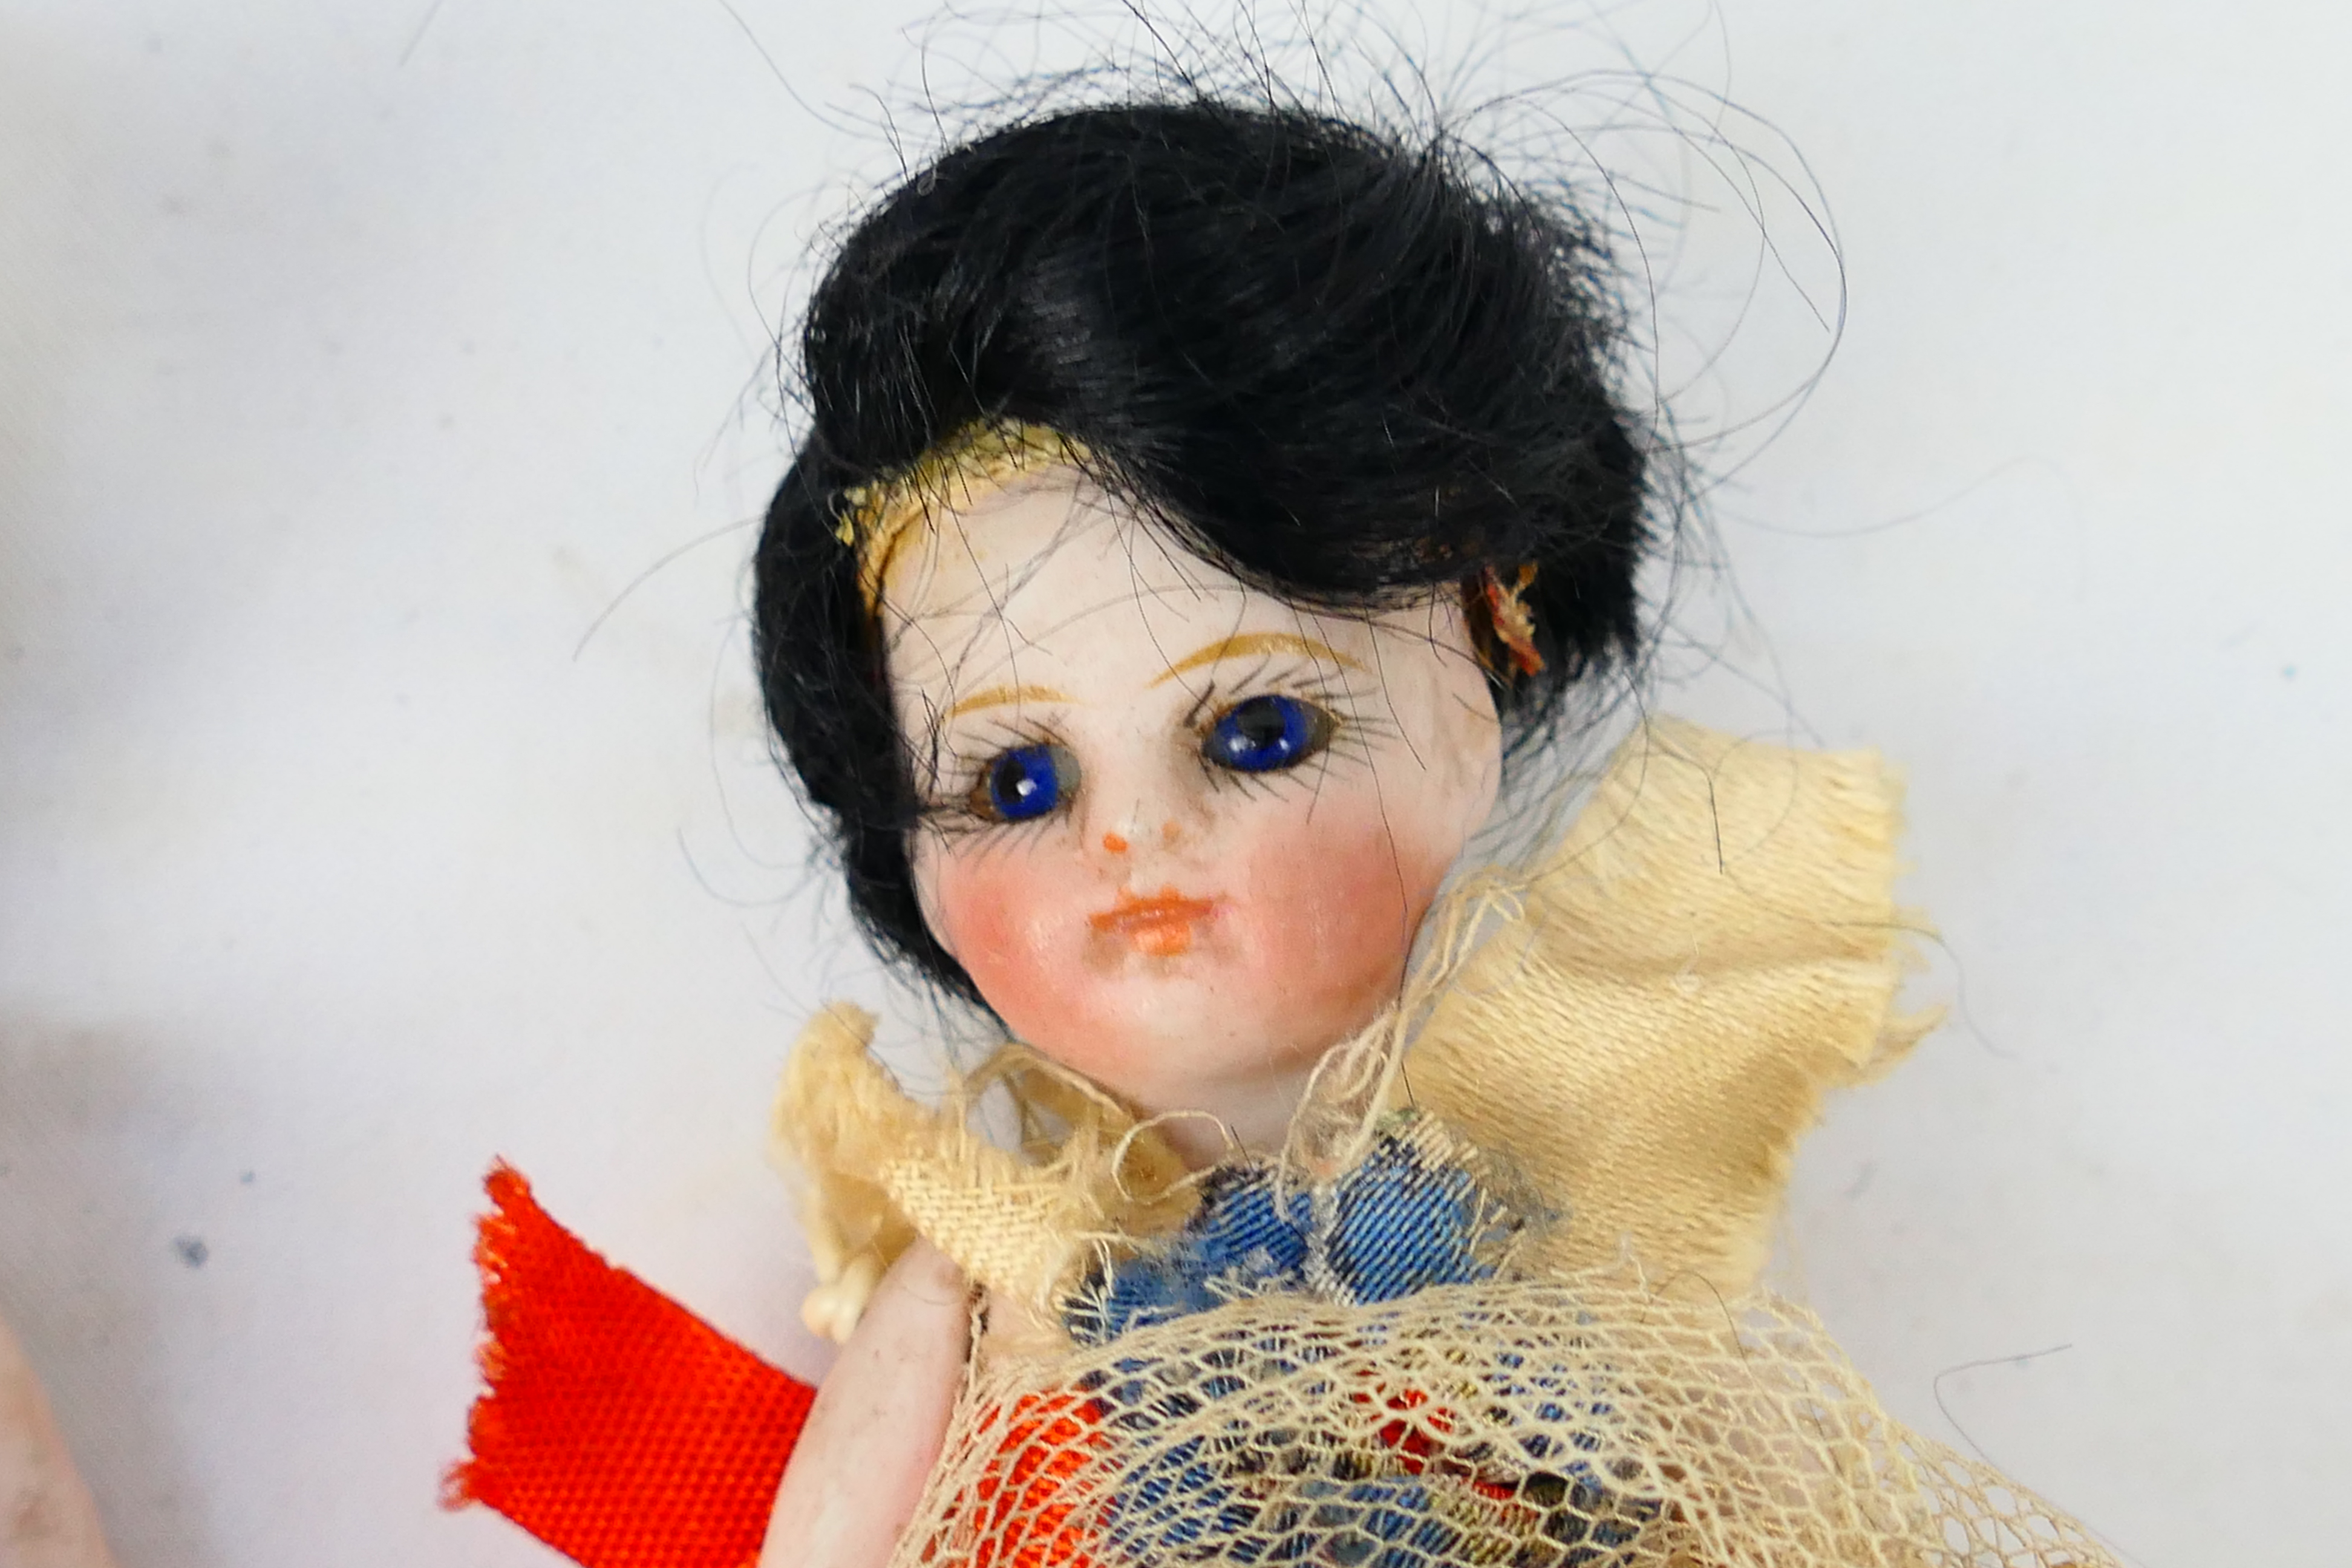 Bisque Mignonette Dolls - 2 x peg jointed all bisque dolls with blue glass eyes and painted - Image 3 of 11